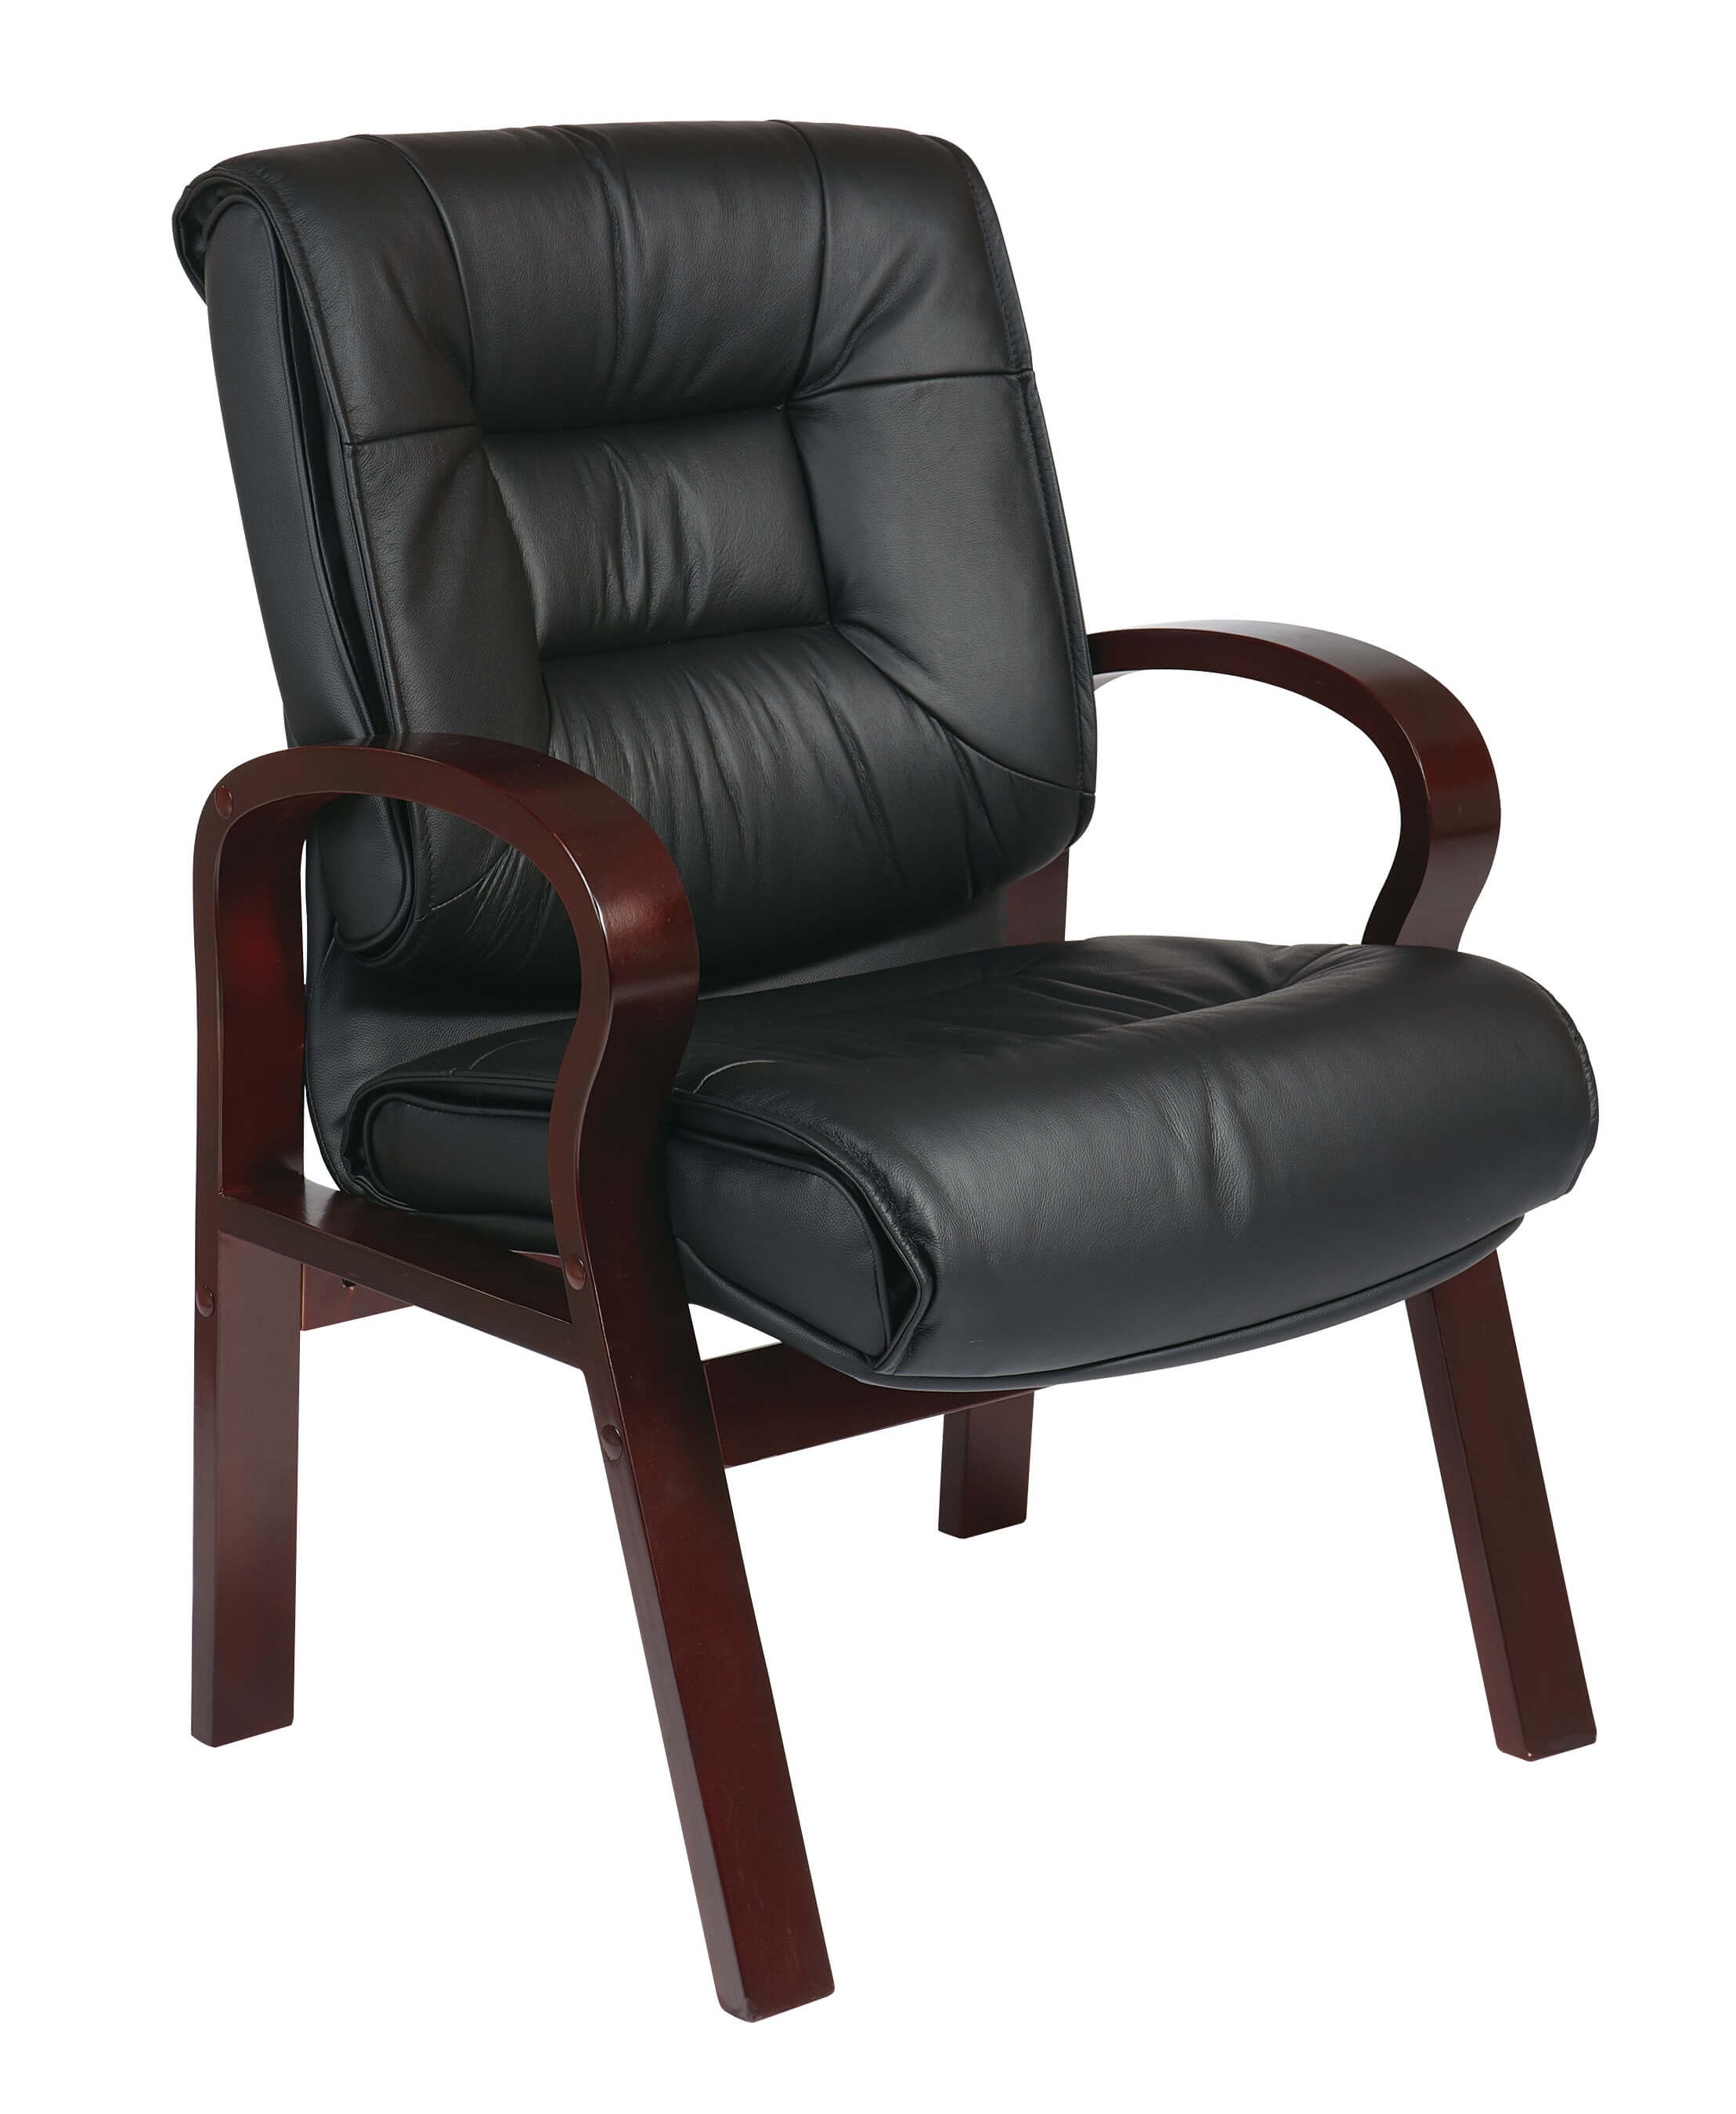 Office waiting room chairs leather guest chair